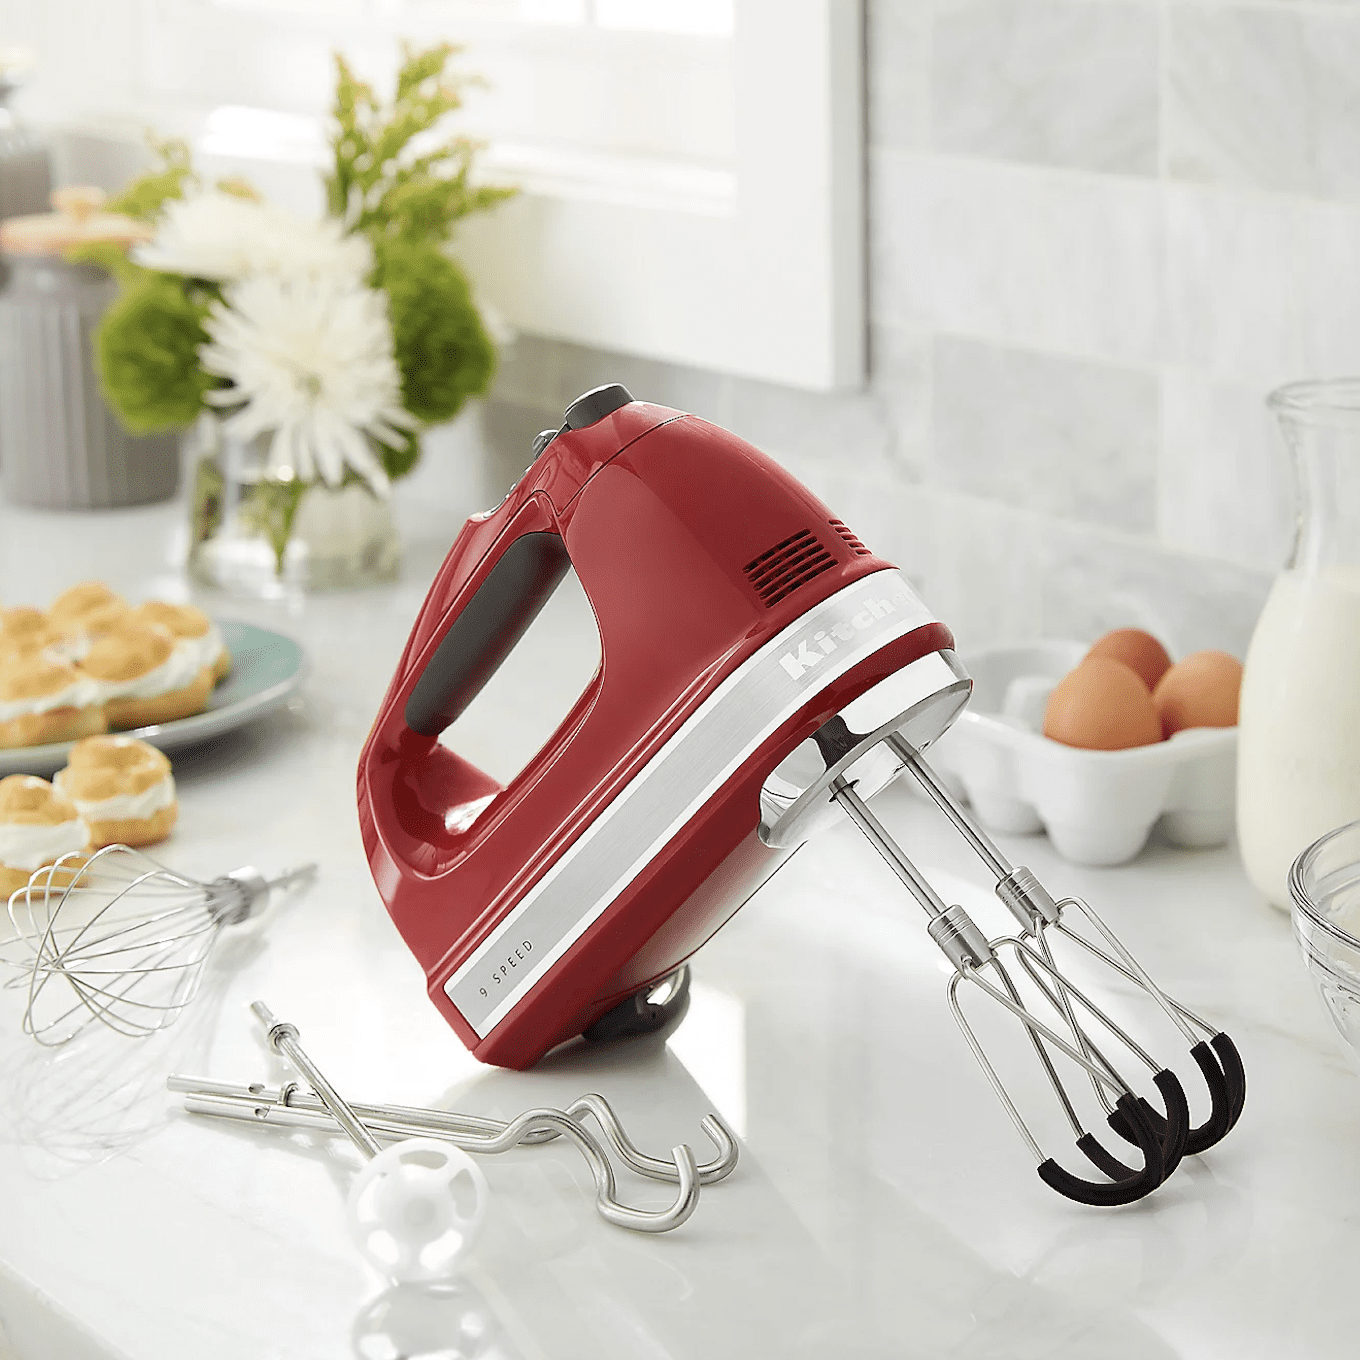 The KitchenAid Pro 600 is on sale at QVC